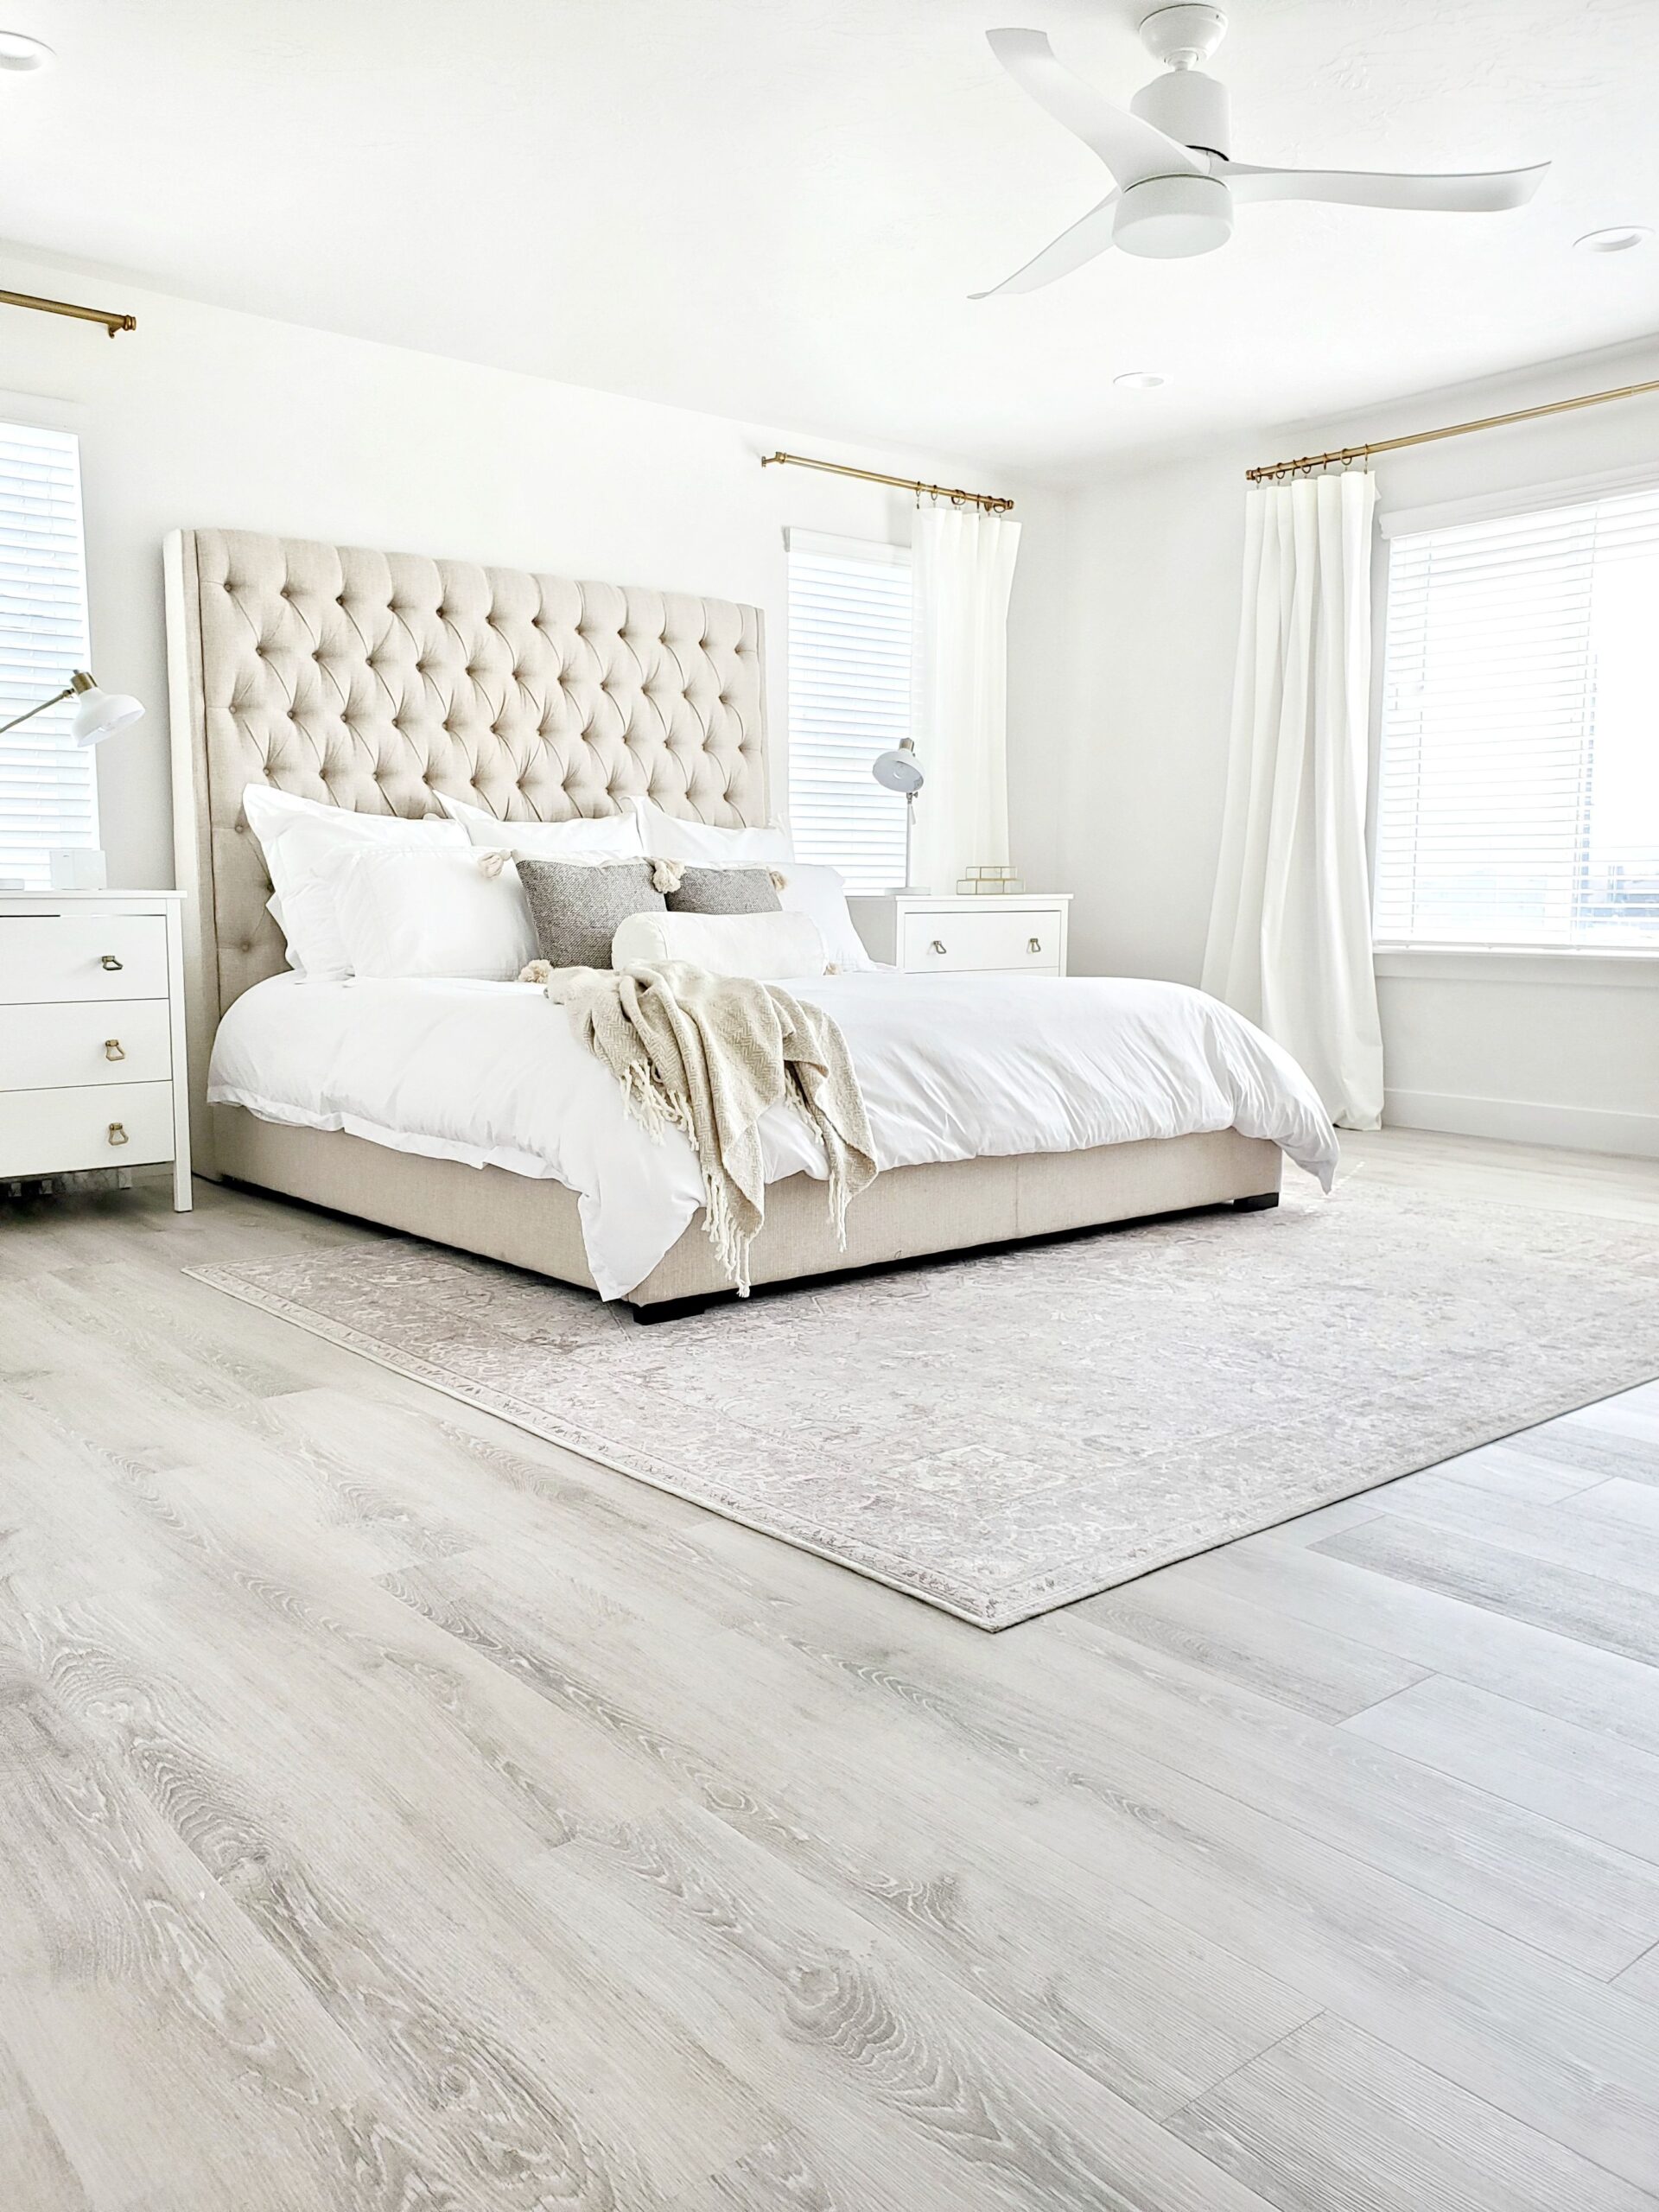 4 tips to why you choose vinyl floors for
  your home